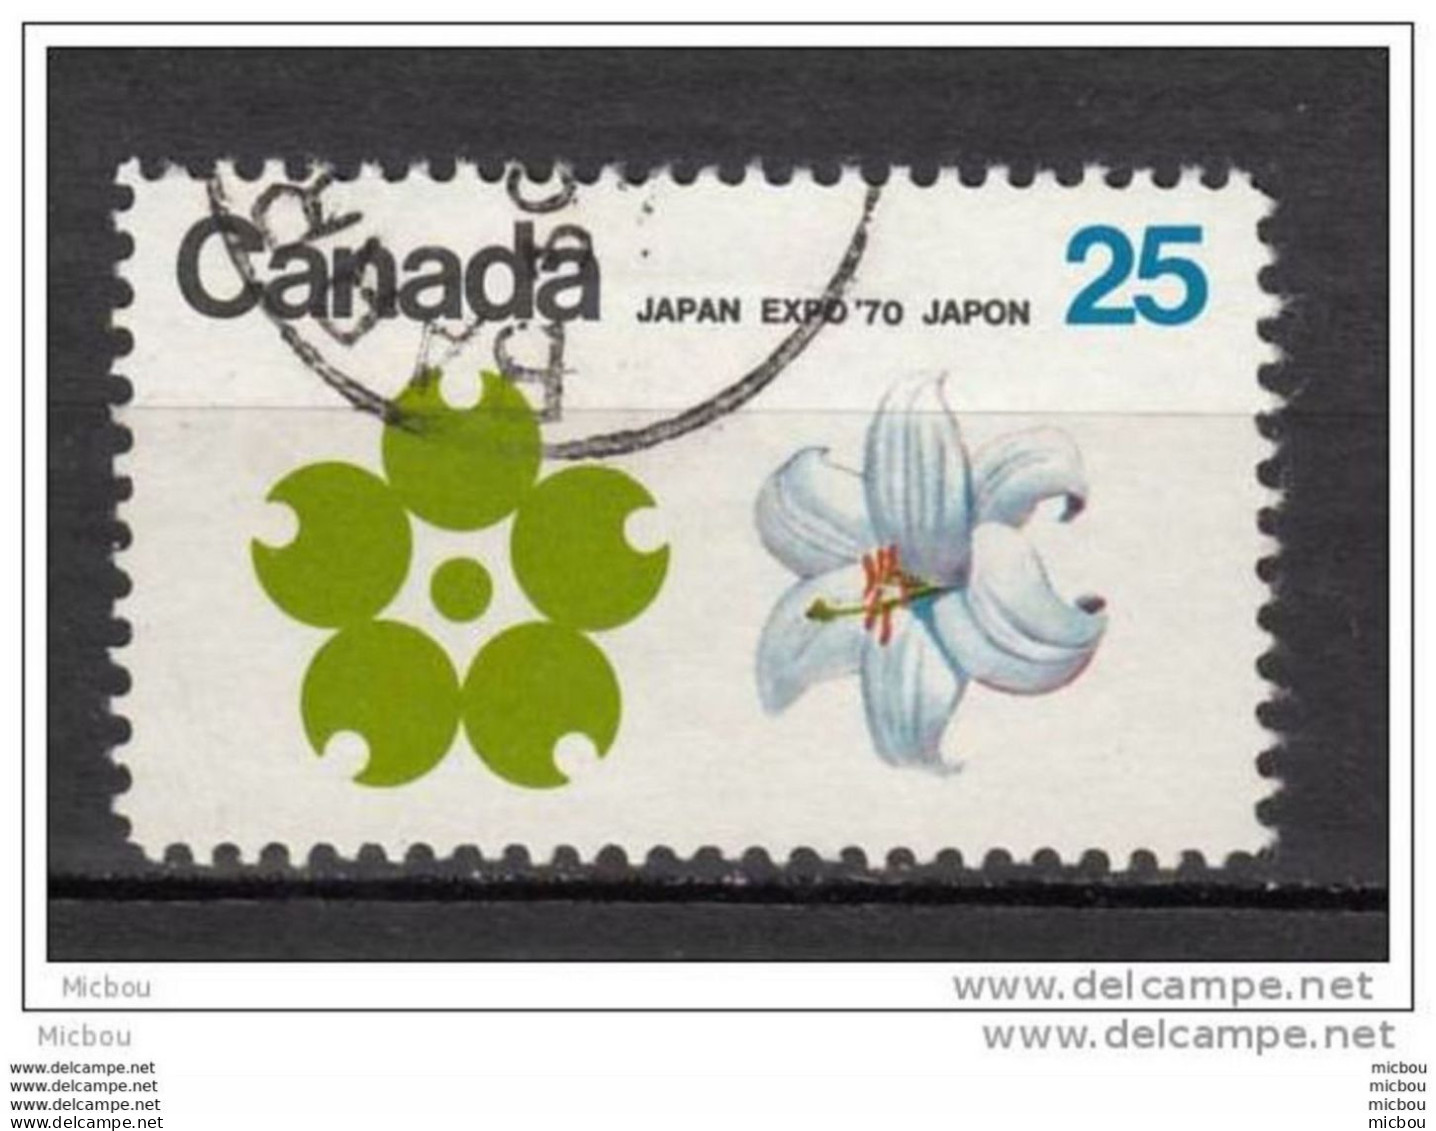 ##8, Canada, Expo 70, Lys, Lis, Lice, Lilly, Fleur, Flower - Used Stamps